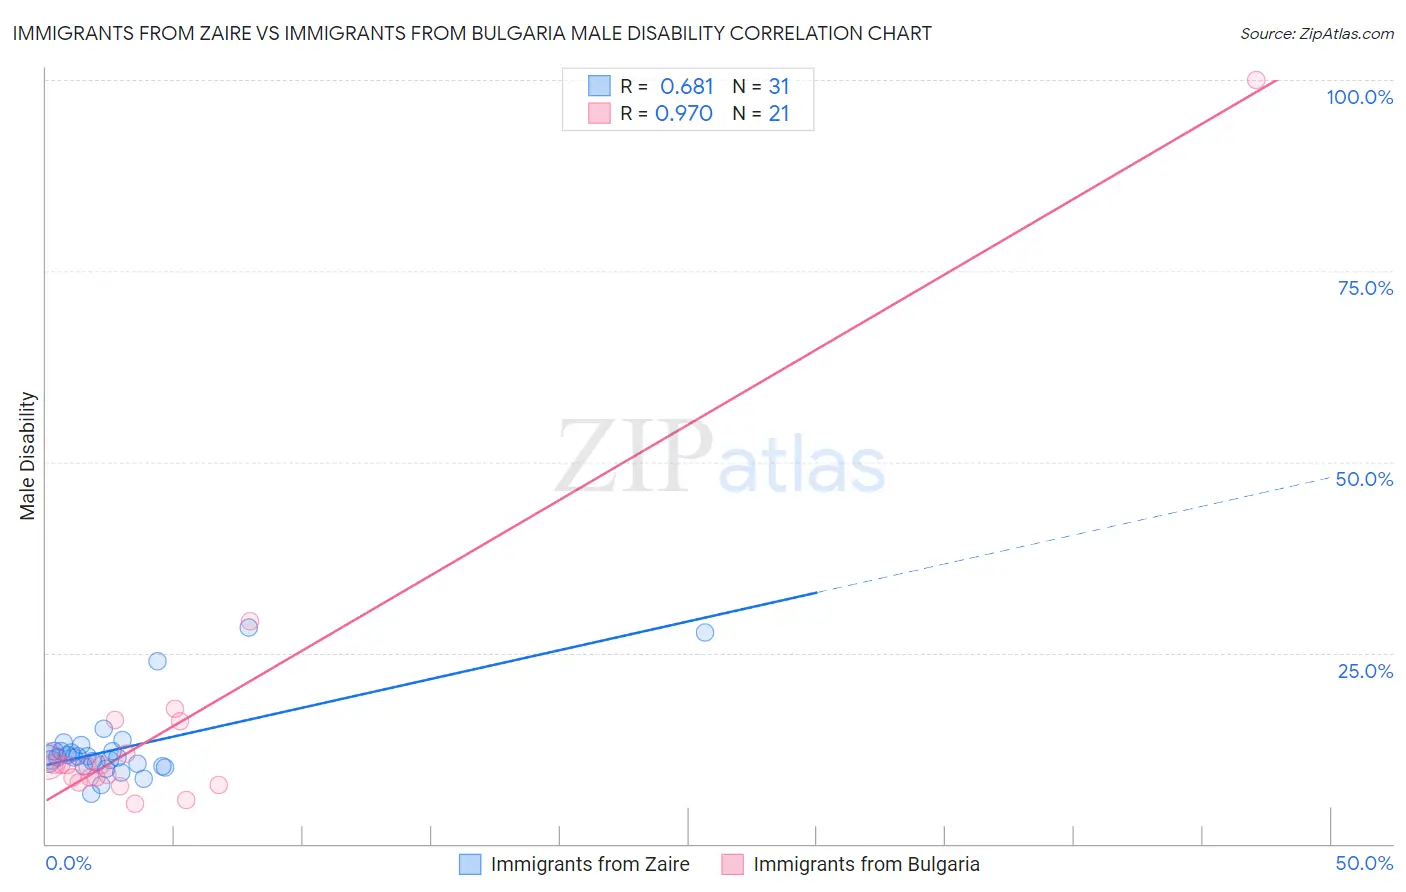 Immigrants from Zaire vs Immigrants from Bulgaria Male Disability